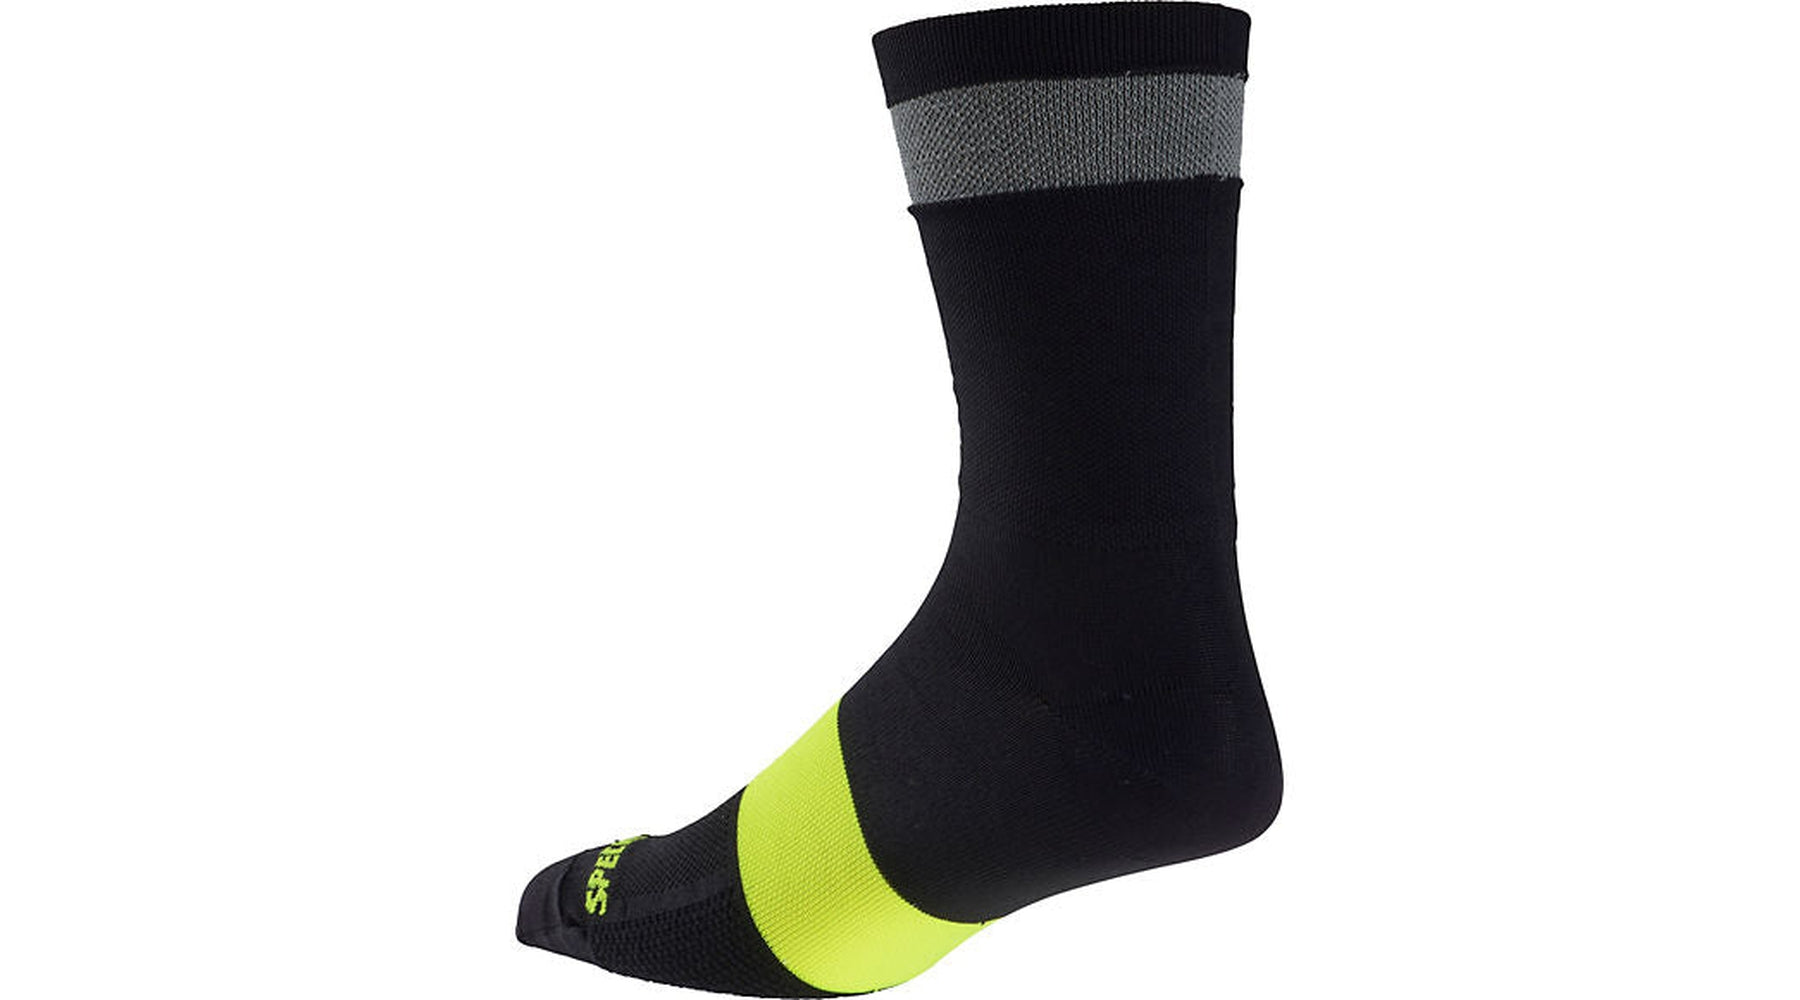 Reflect Tall Socks | completecyclist - Constructed from our extremely lightweight VaporRizeª yarns, the Reflect Tall Socks are nearly identical in fit and feel to our SL line. This means that you'll